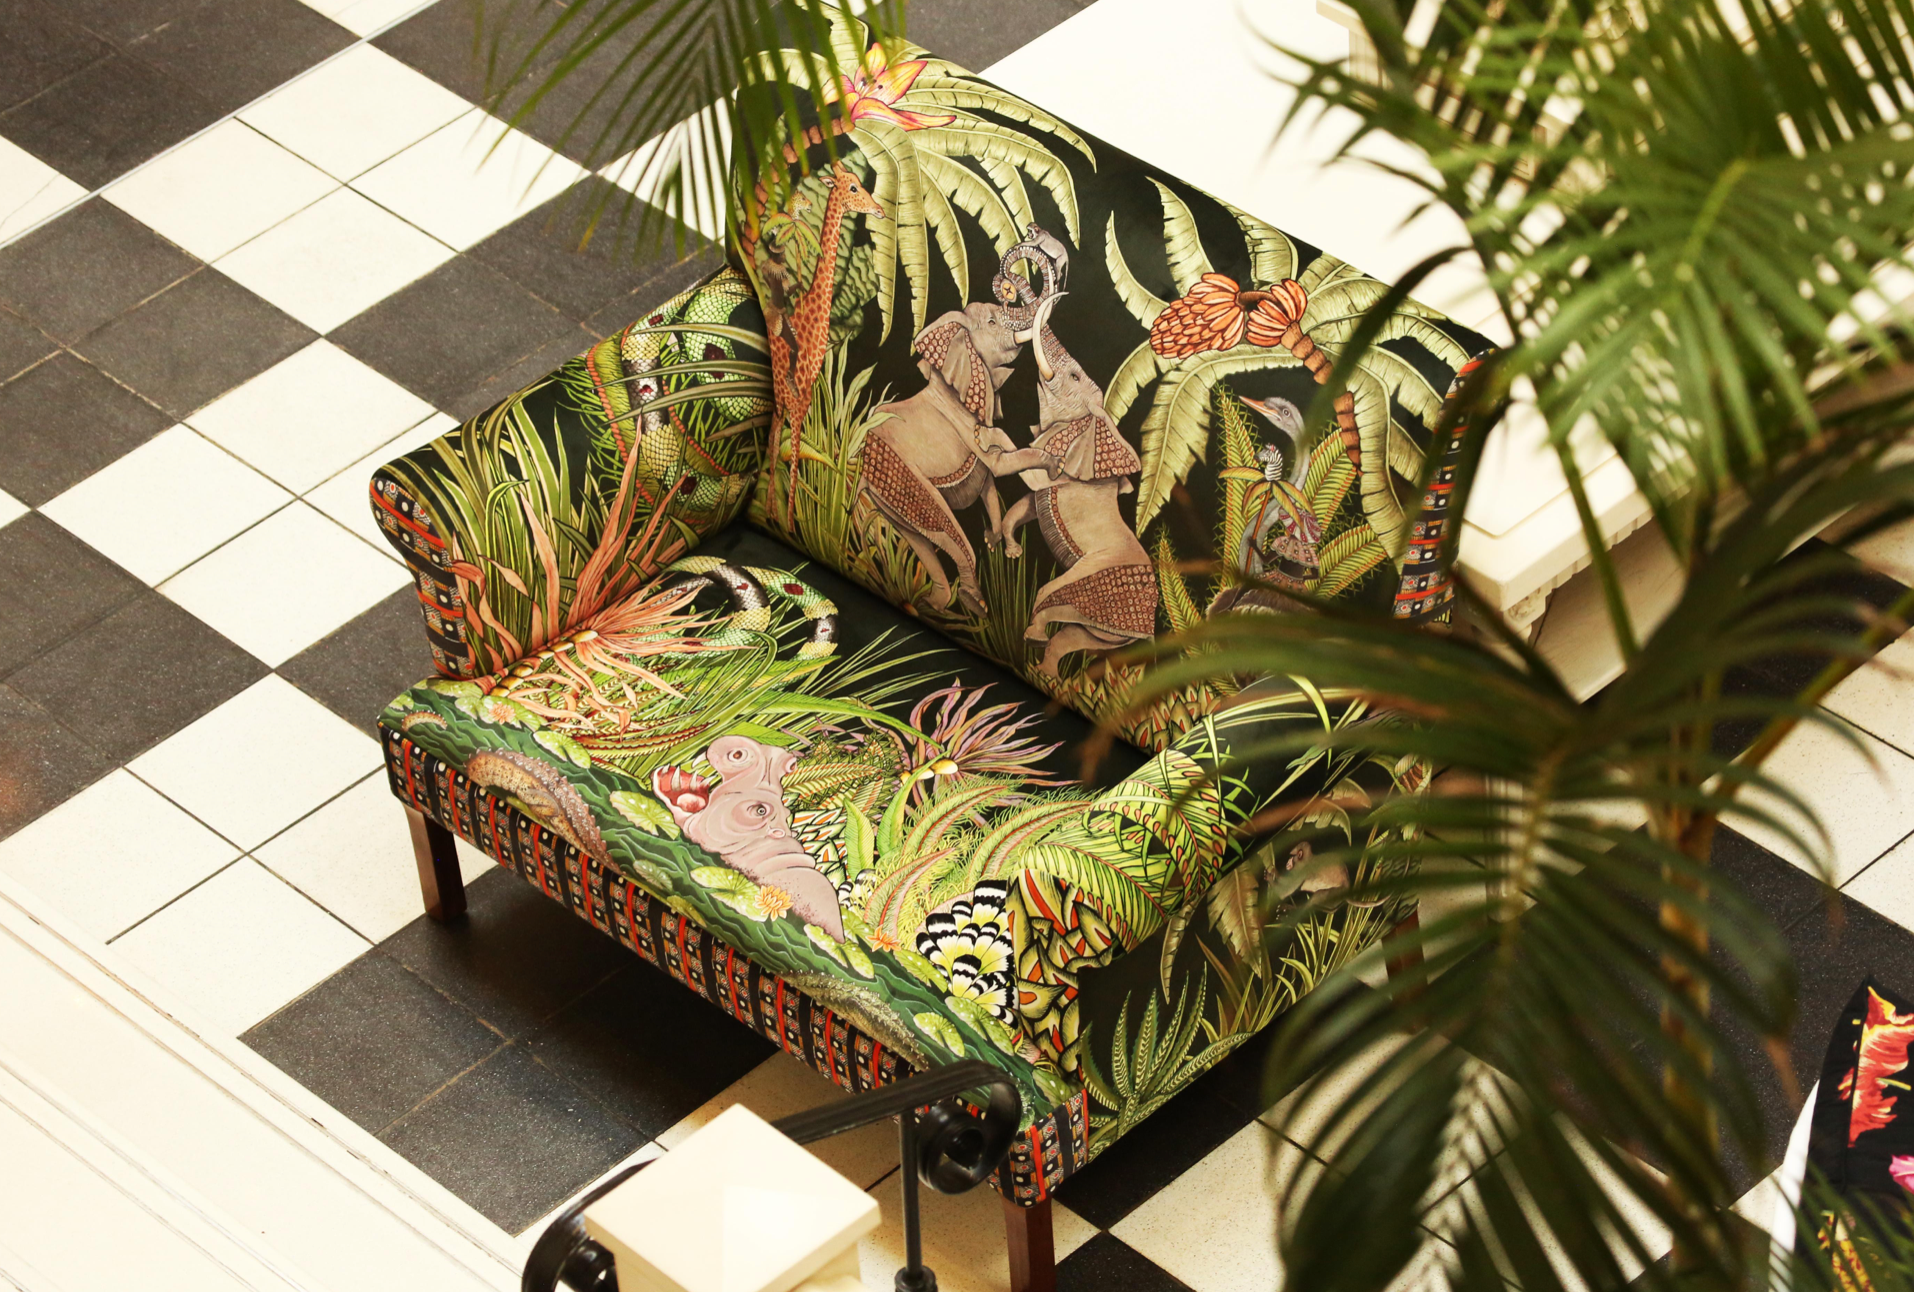 Sabie Delta Limited Edition Sofa by Ardmore handmade in South Africa (made to order)